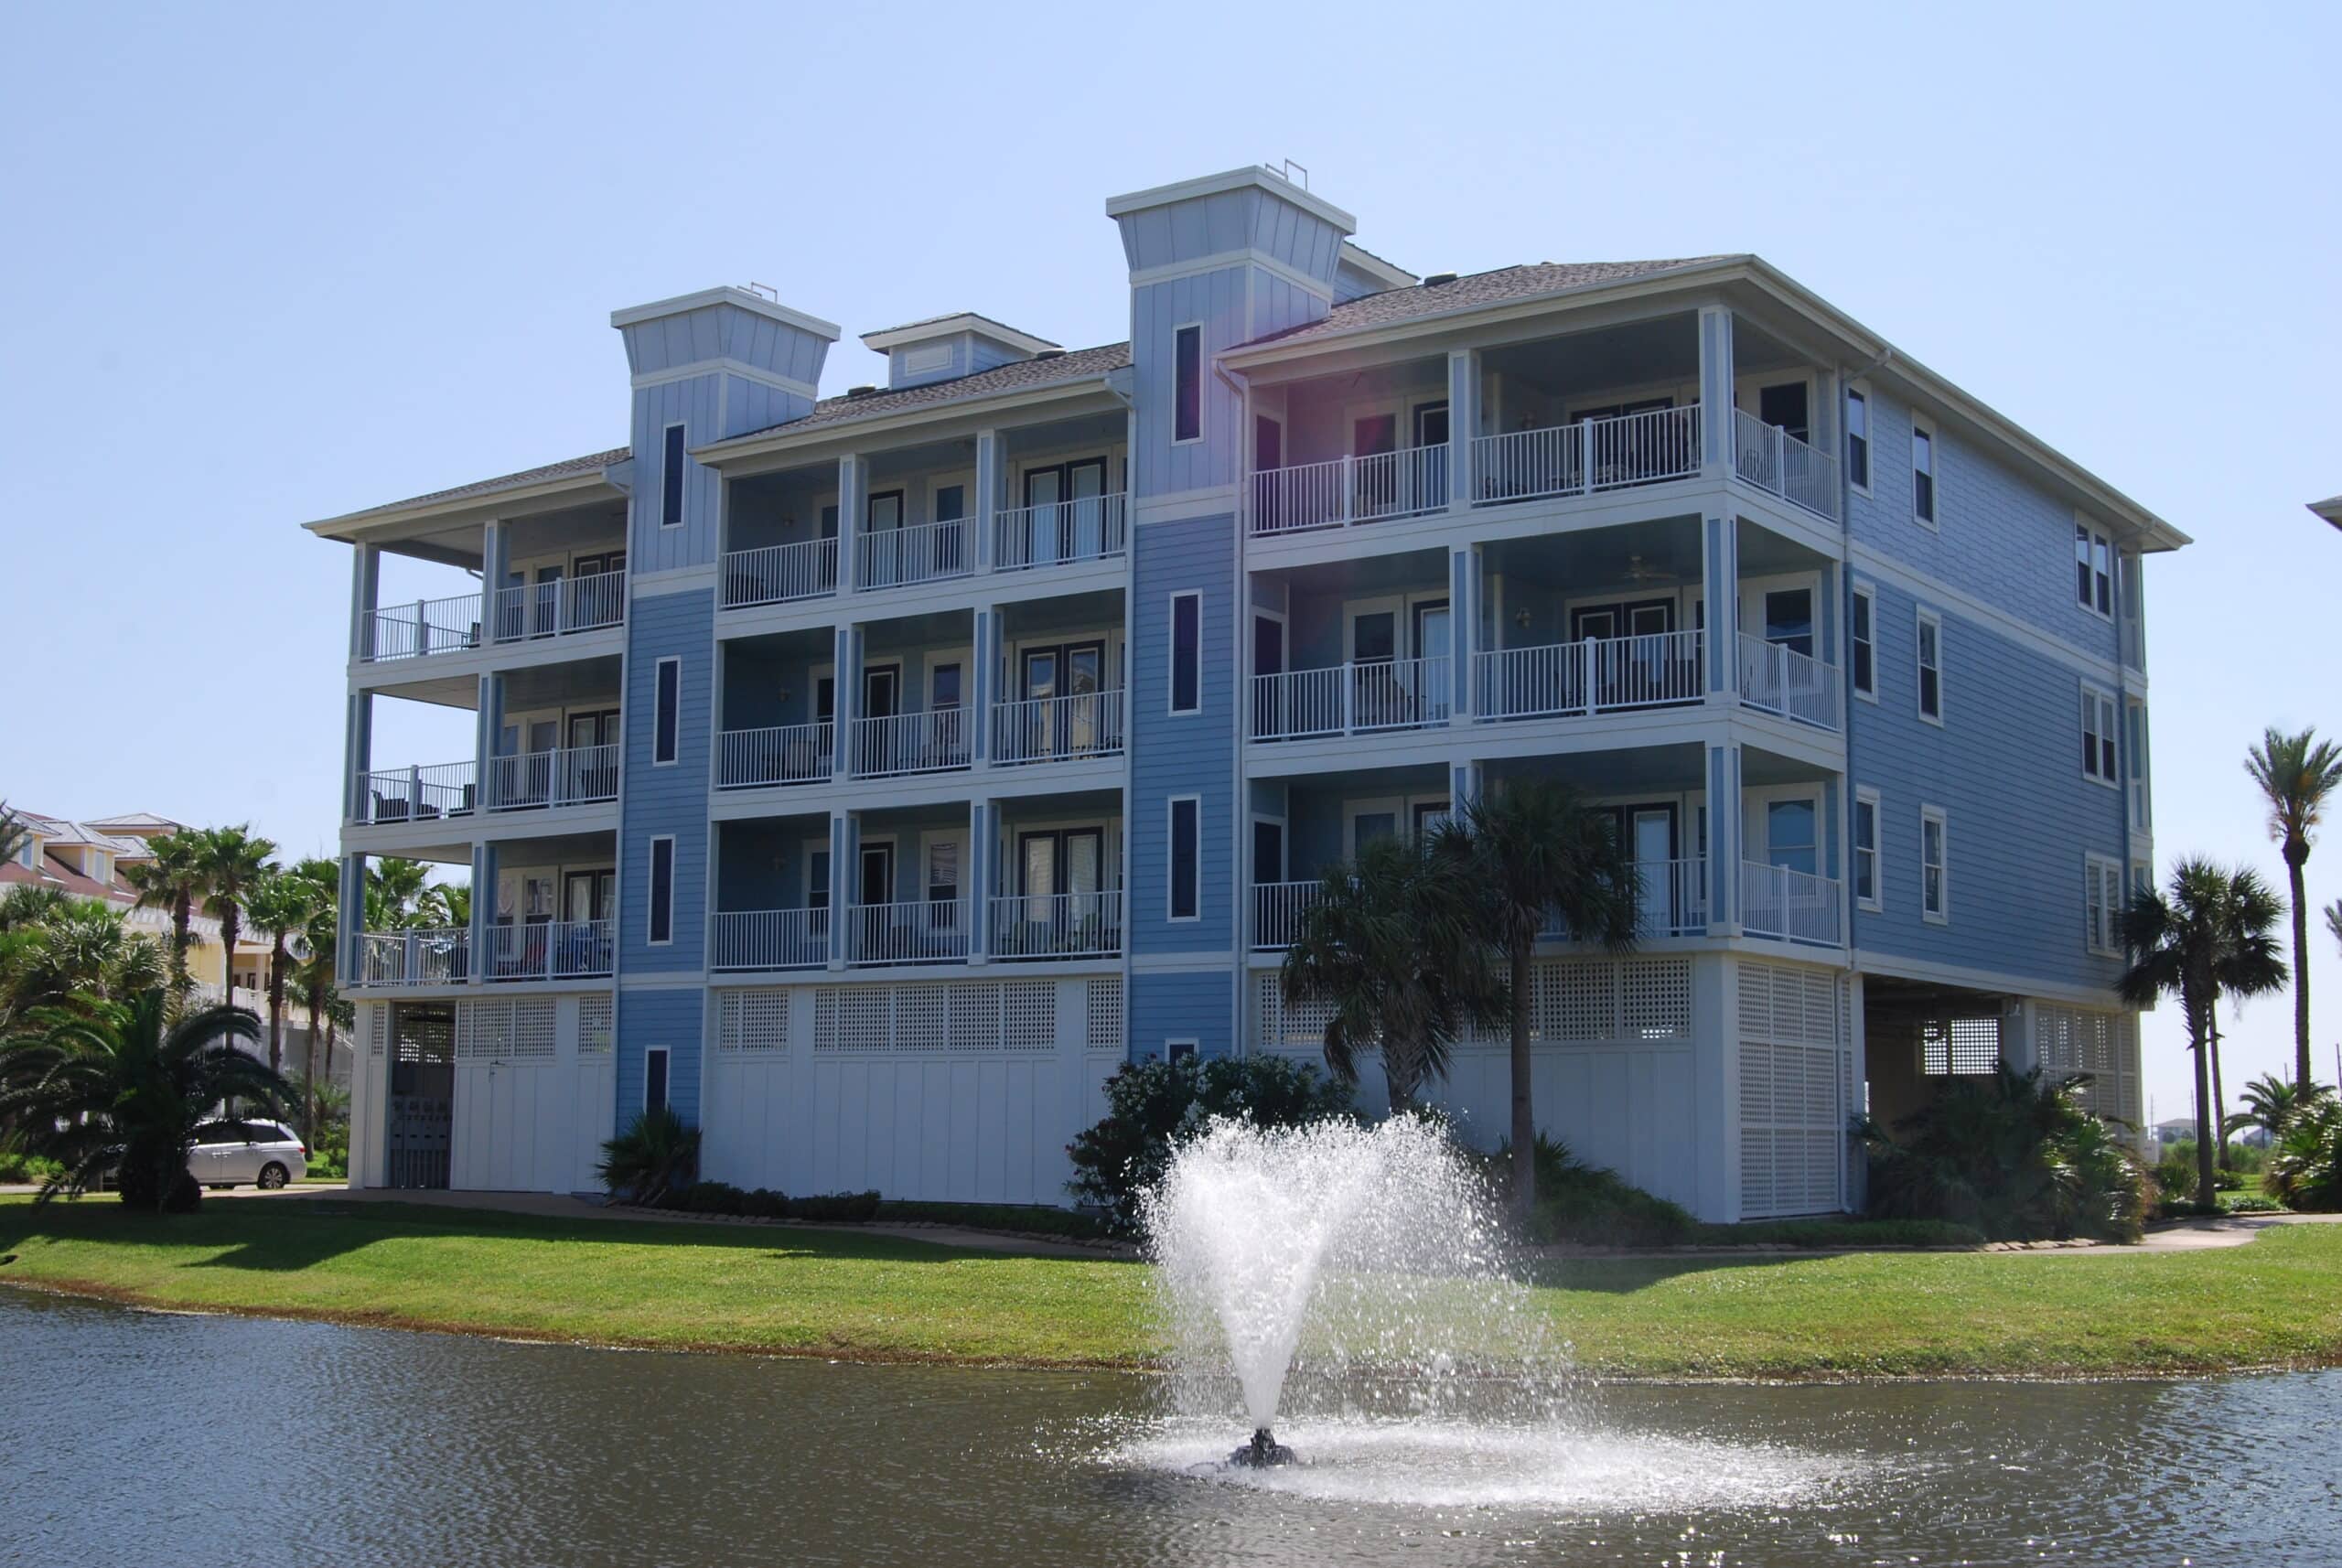 Photo of building at Pointe West Condominiums with fountain